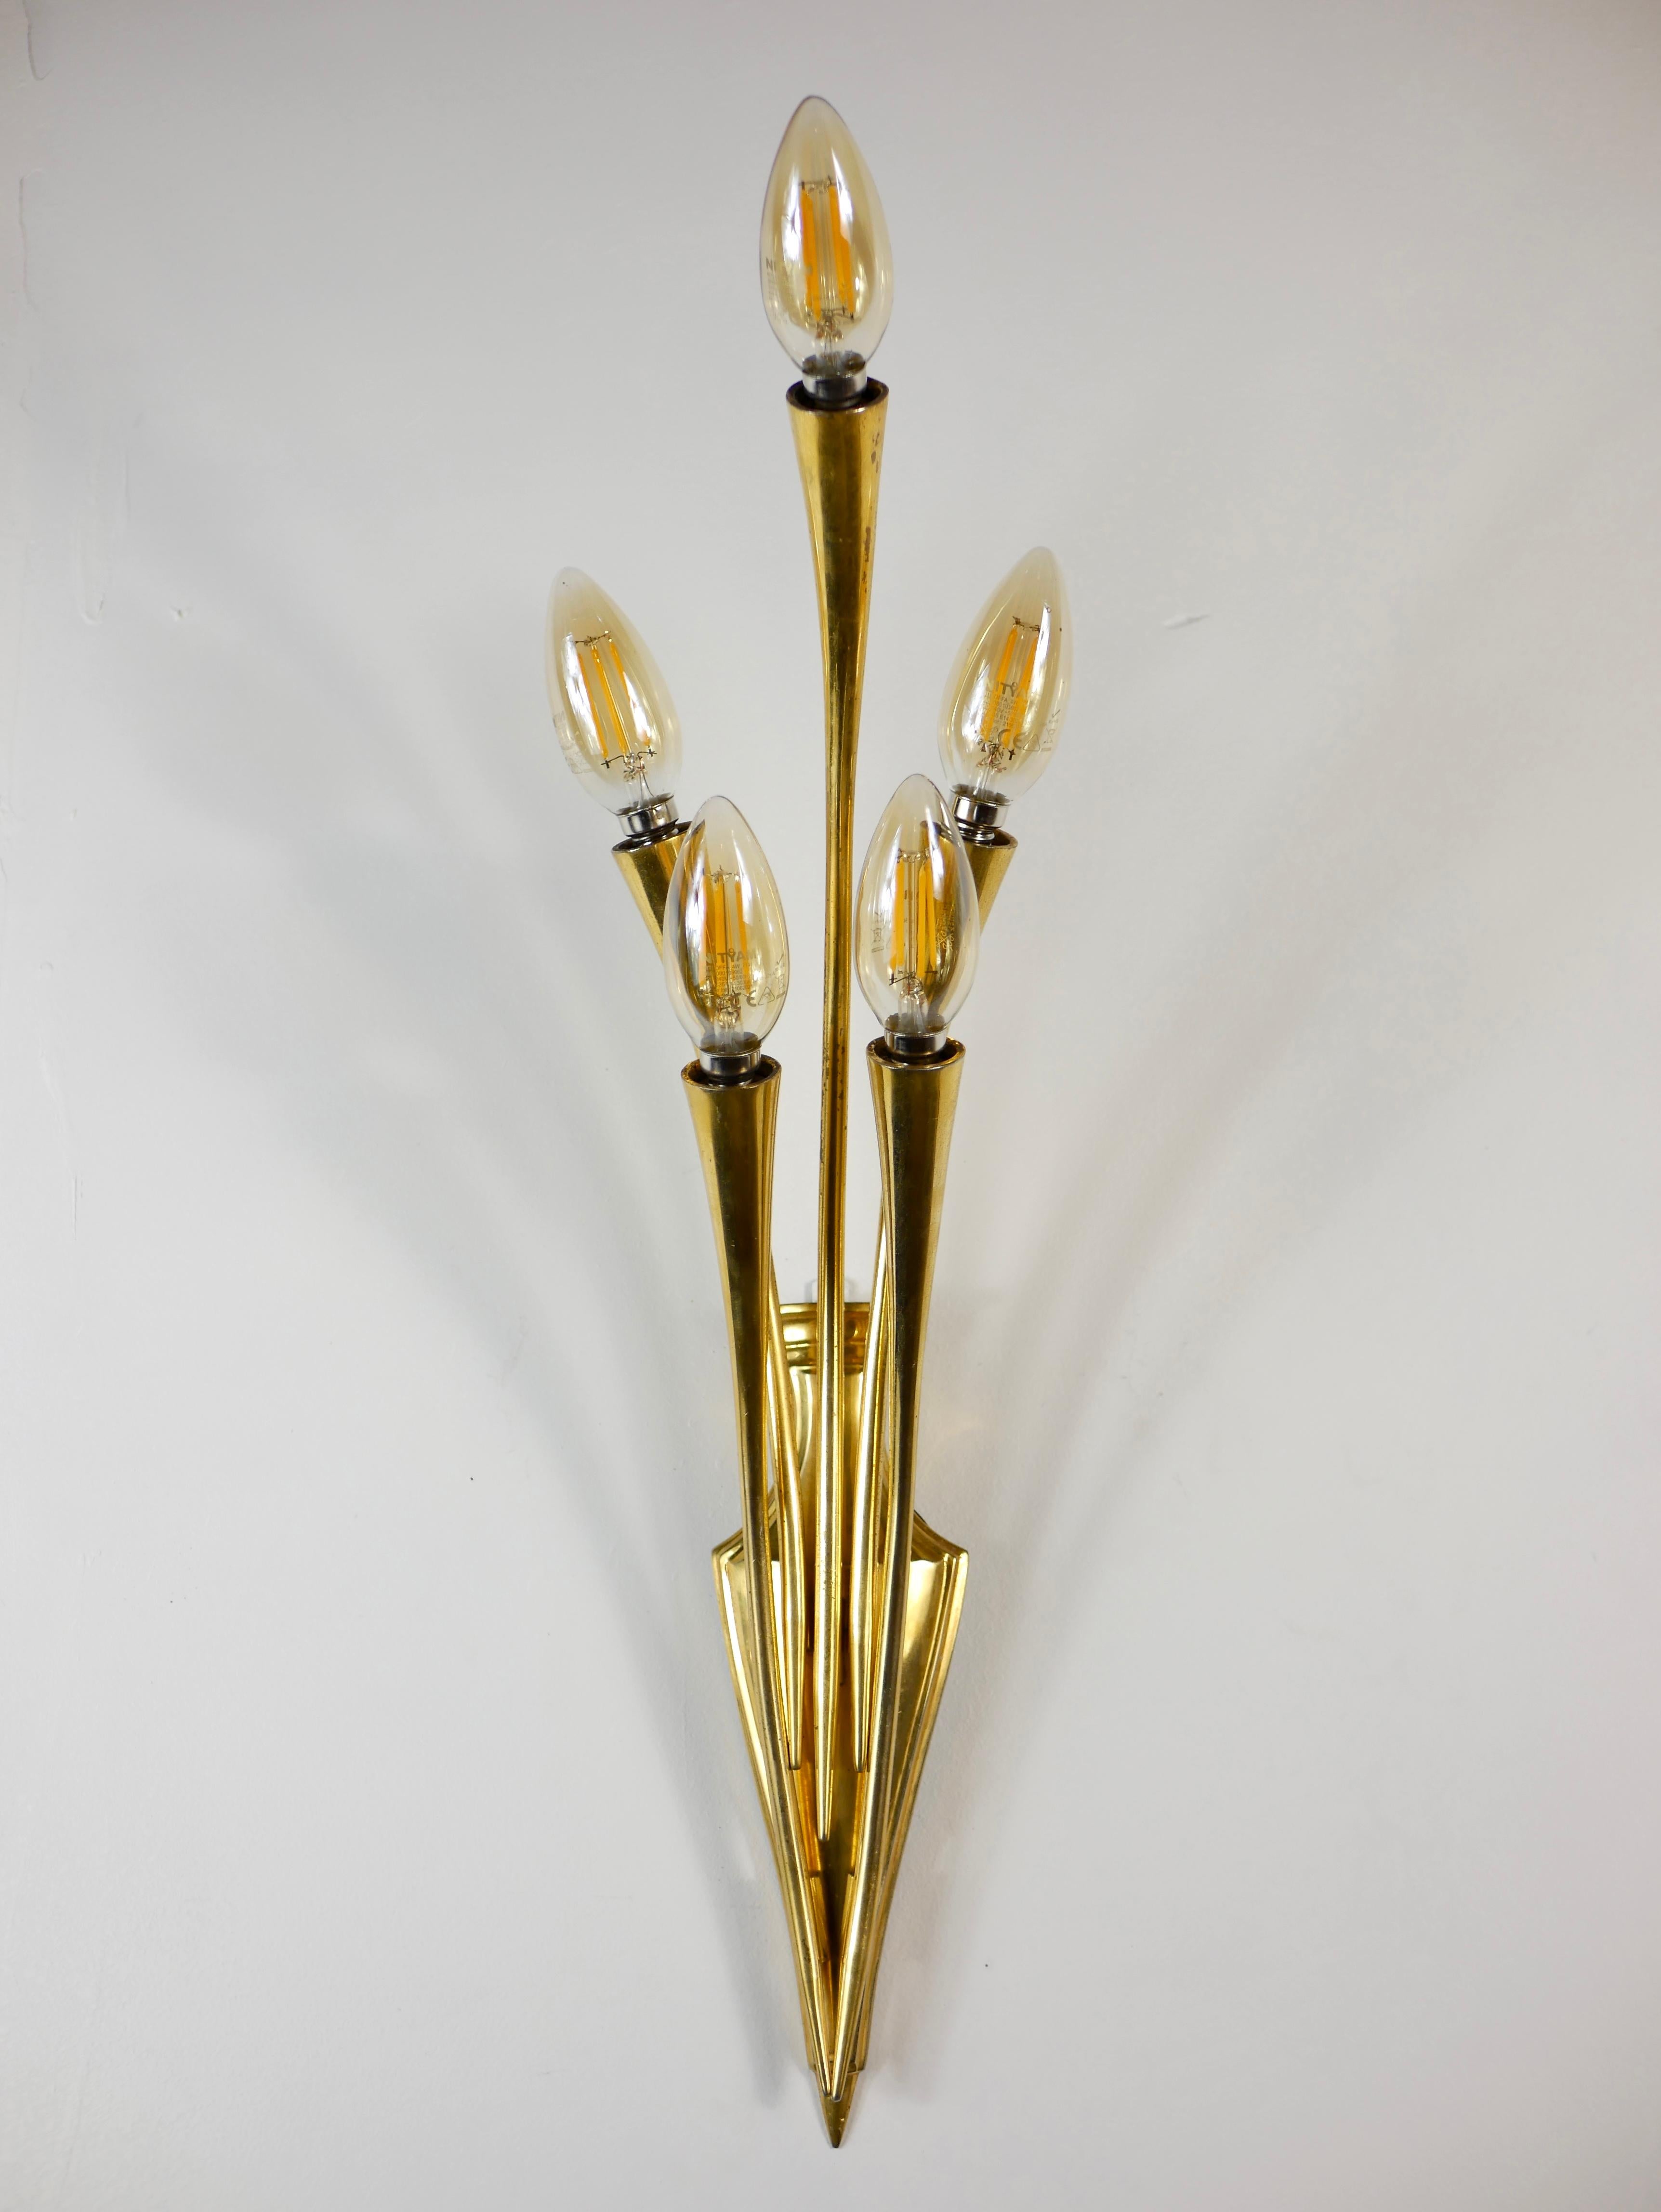 Stunning brass sconce from the 1950s, designed by Oscar Torlasco for Lumi Milano.
Beautiful patina.
